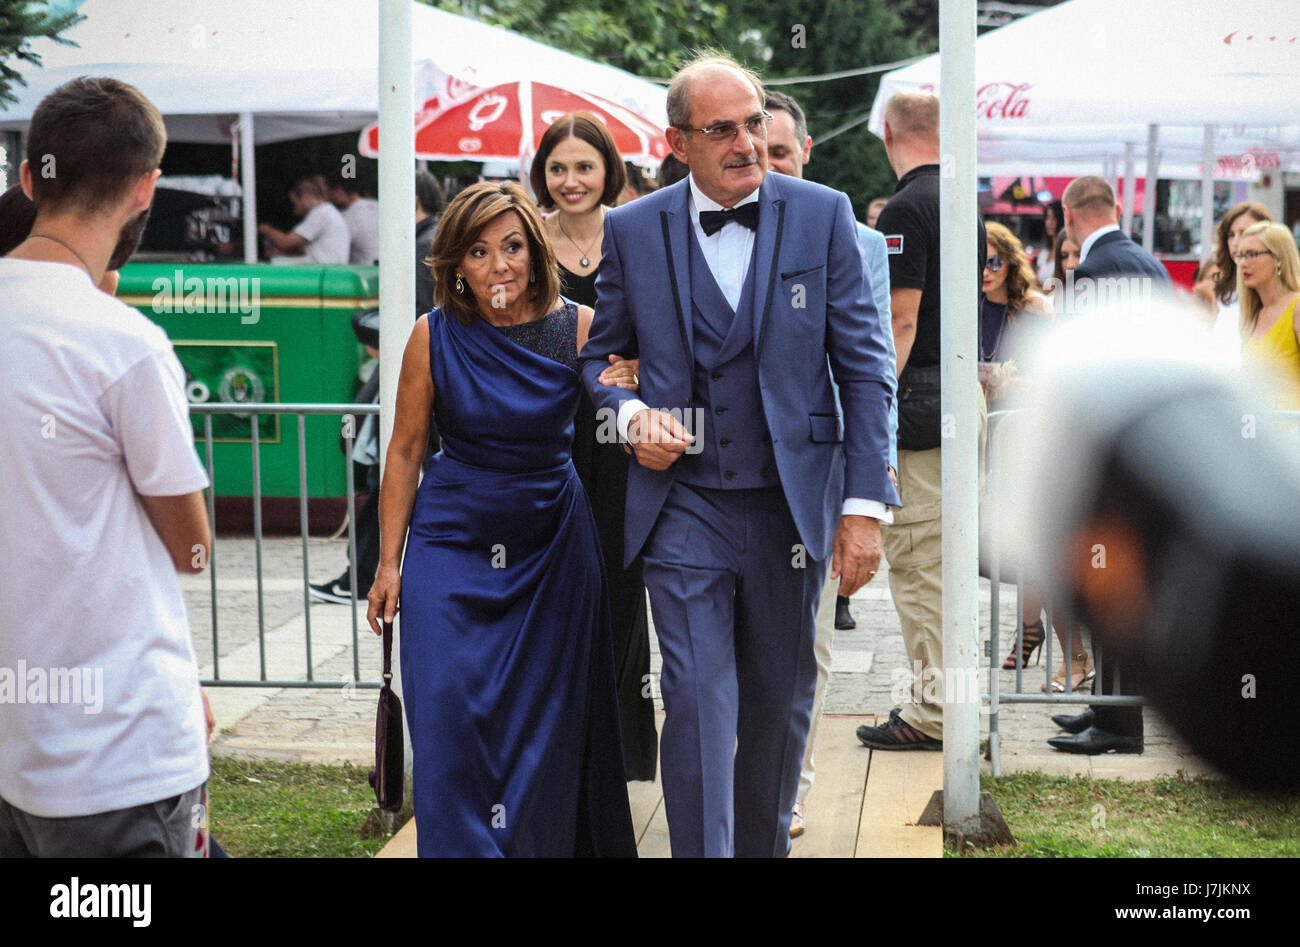 Nijaz Hastor (R) and his wife Mirsada Hastor (L) arrives in welcome drink before opening of 21st Sarajevo Film Festival in 2015. Stock Photo